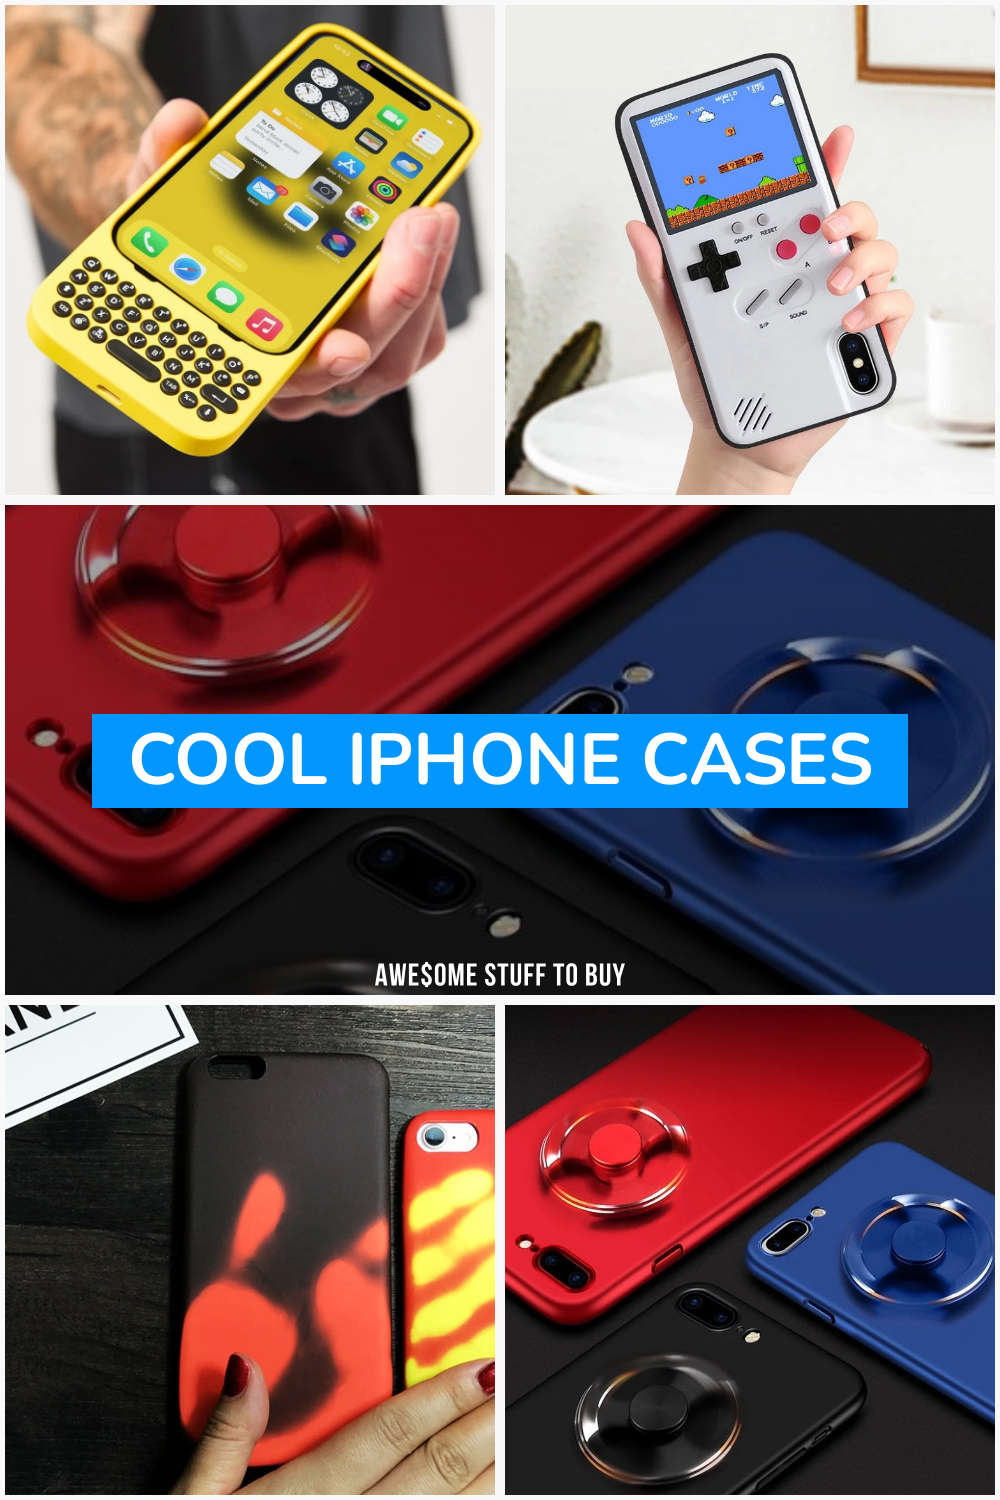 Cool iPhone Cases // Awesome Stuff to Buy